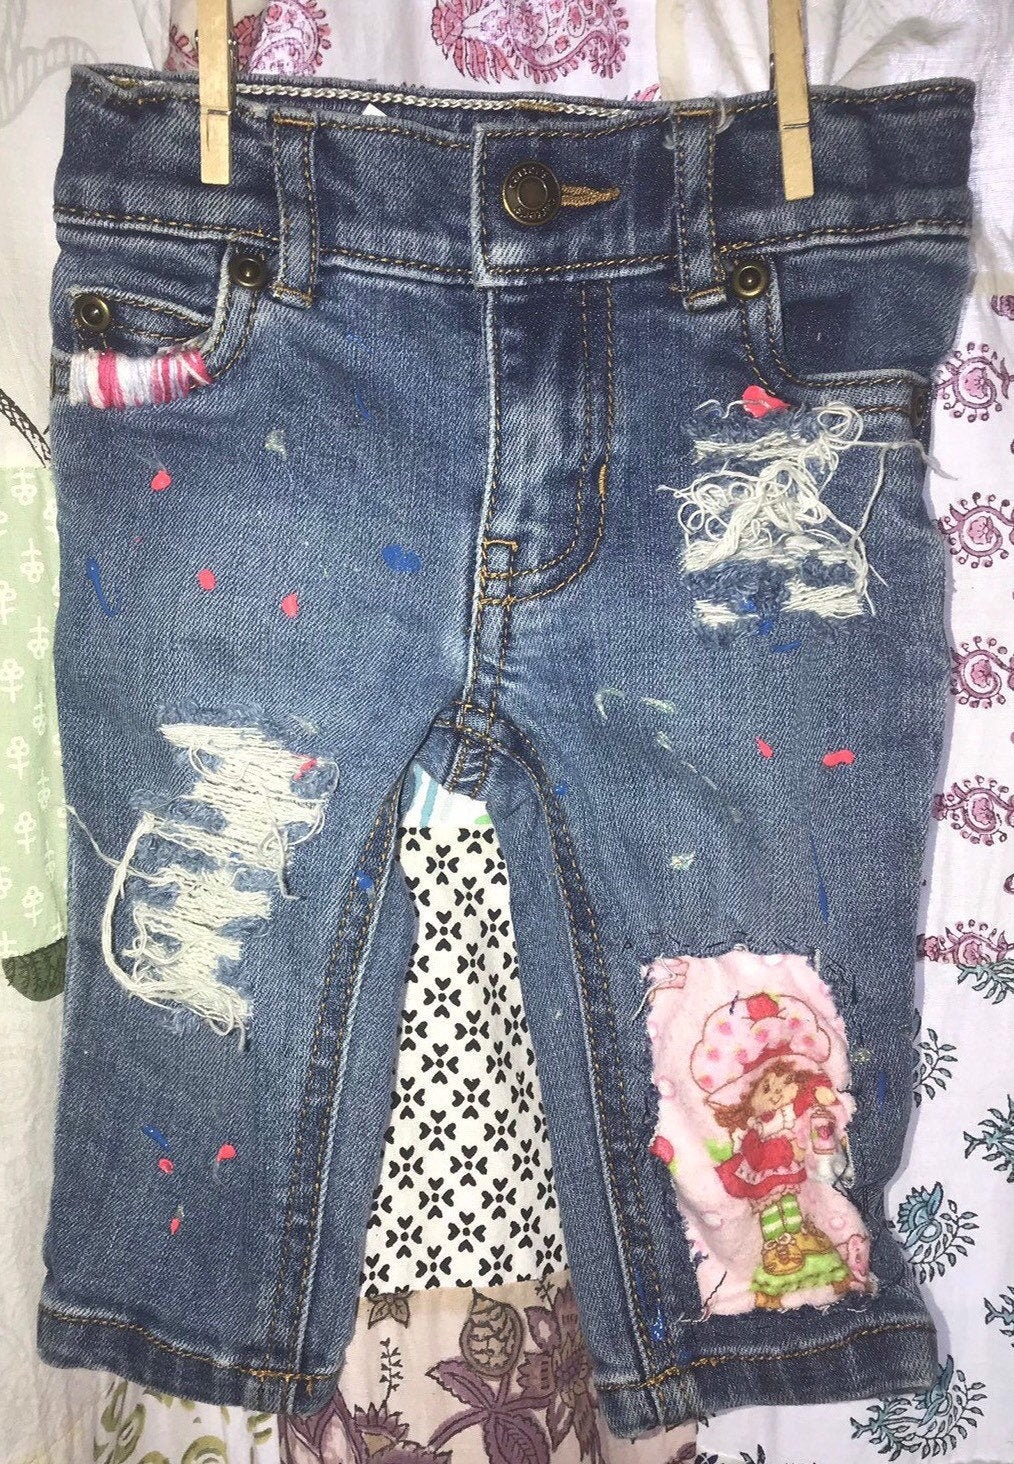 Distressed Ripped Jeans Strawberry Shortcake Baby 6 Months | Etsy